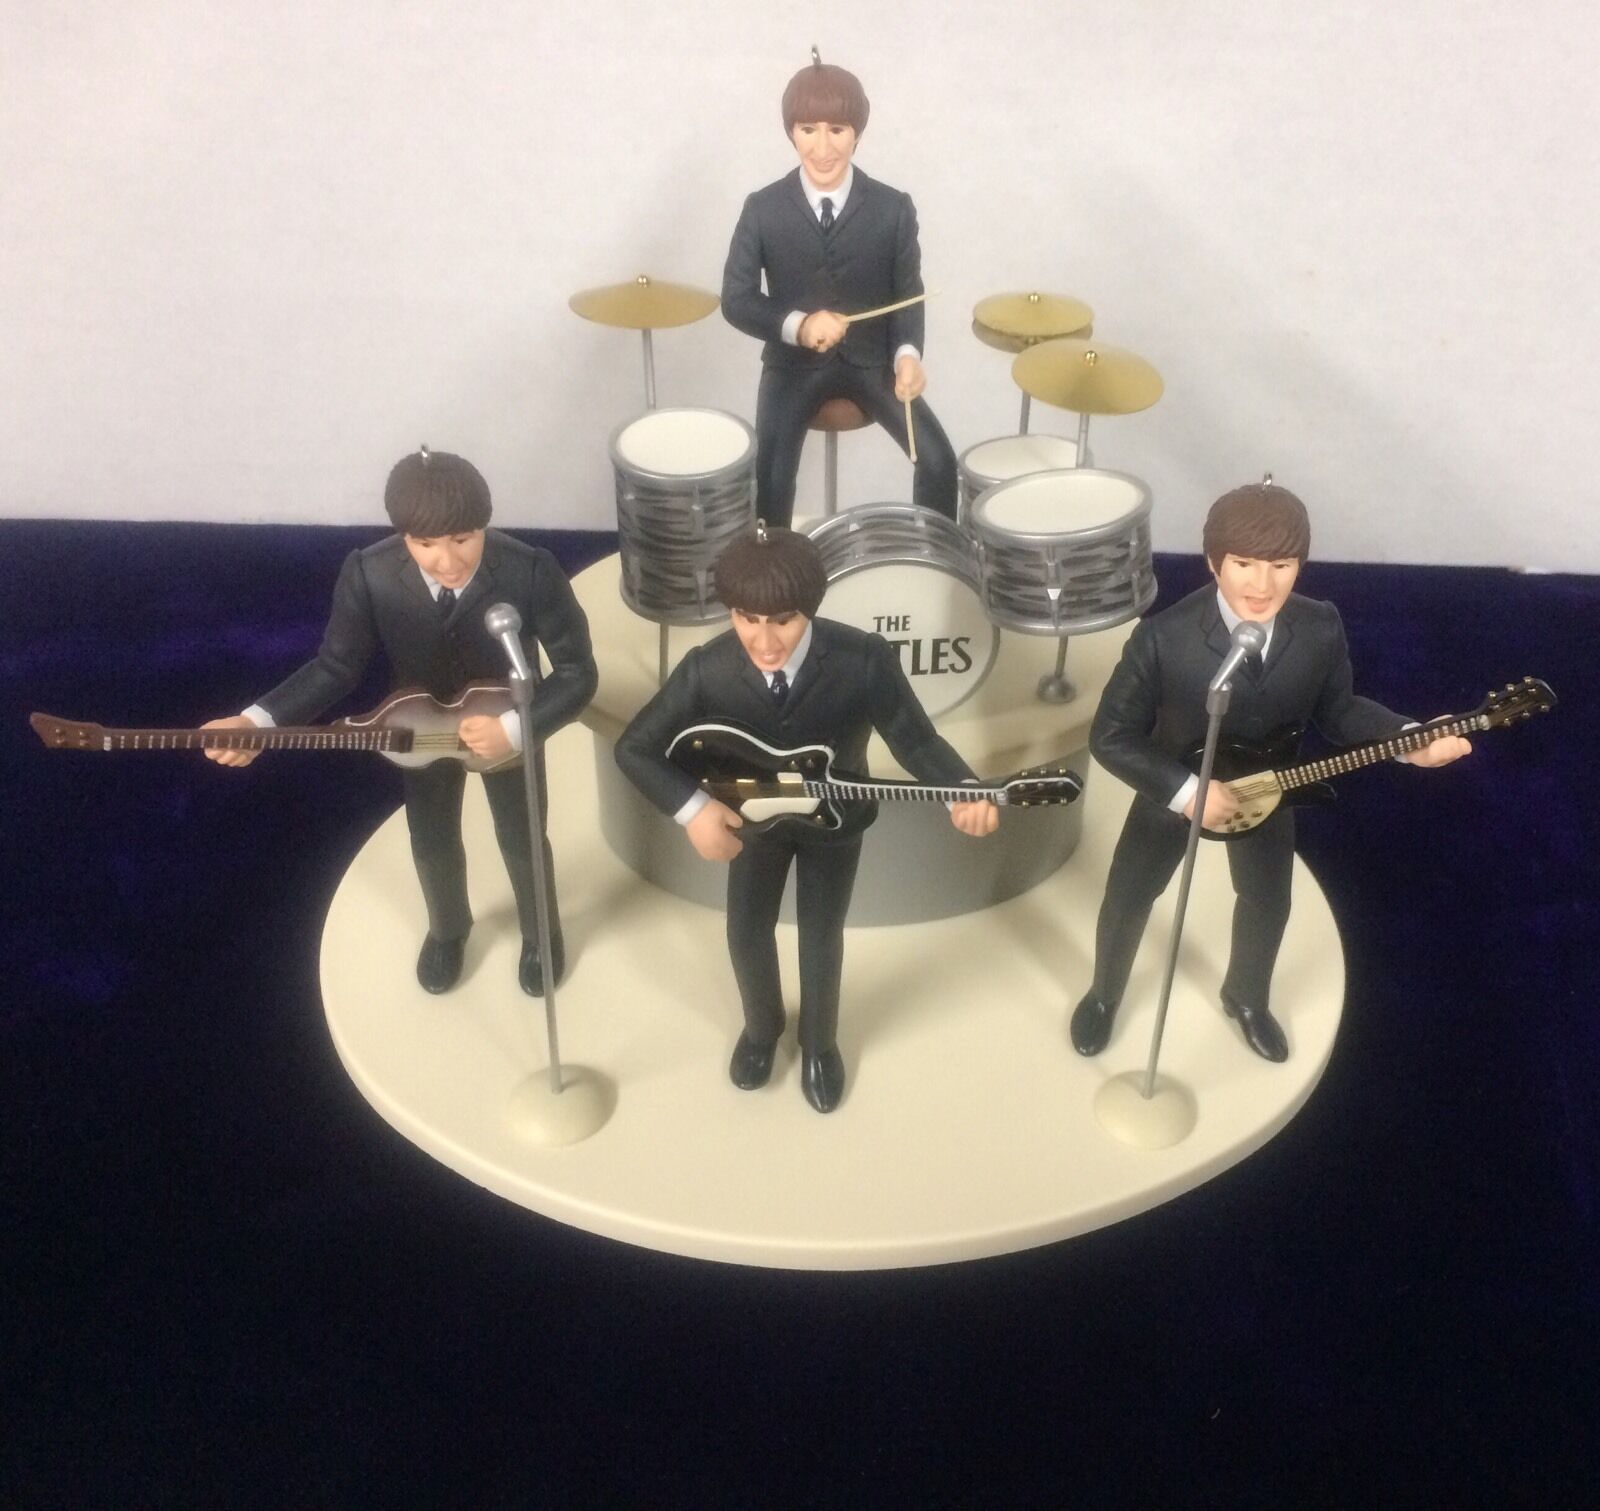 BEATLES ED SULLIVAN FIGURE SET OF 4 WITH INSTRUMENTS ON STAGE NEW IN BOX 1994 Без бренда